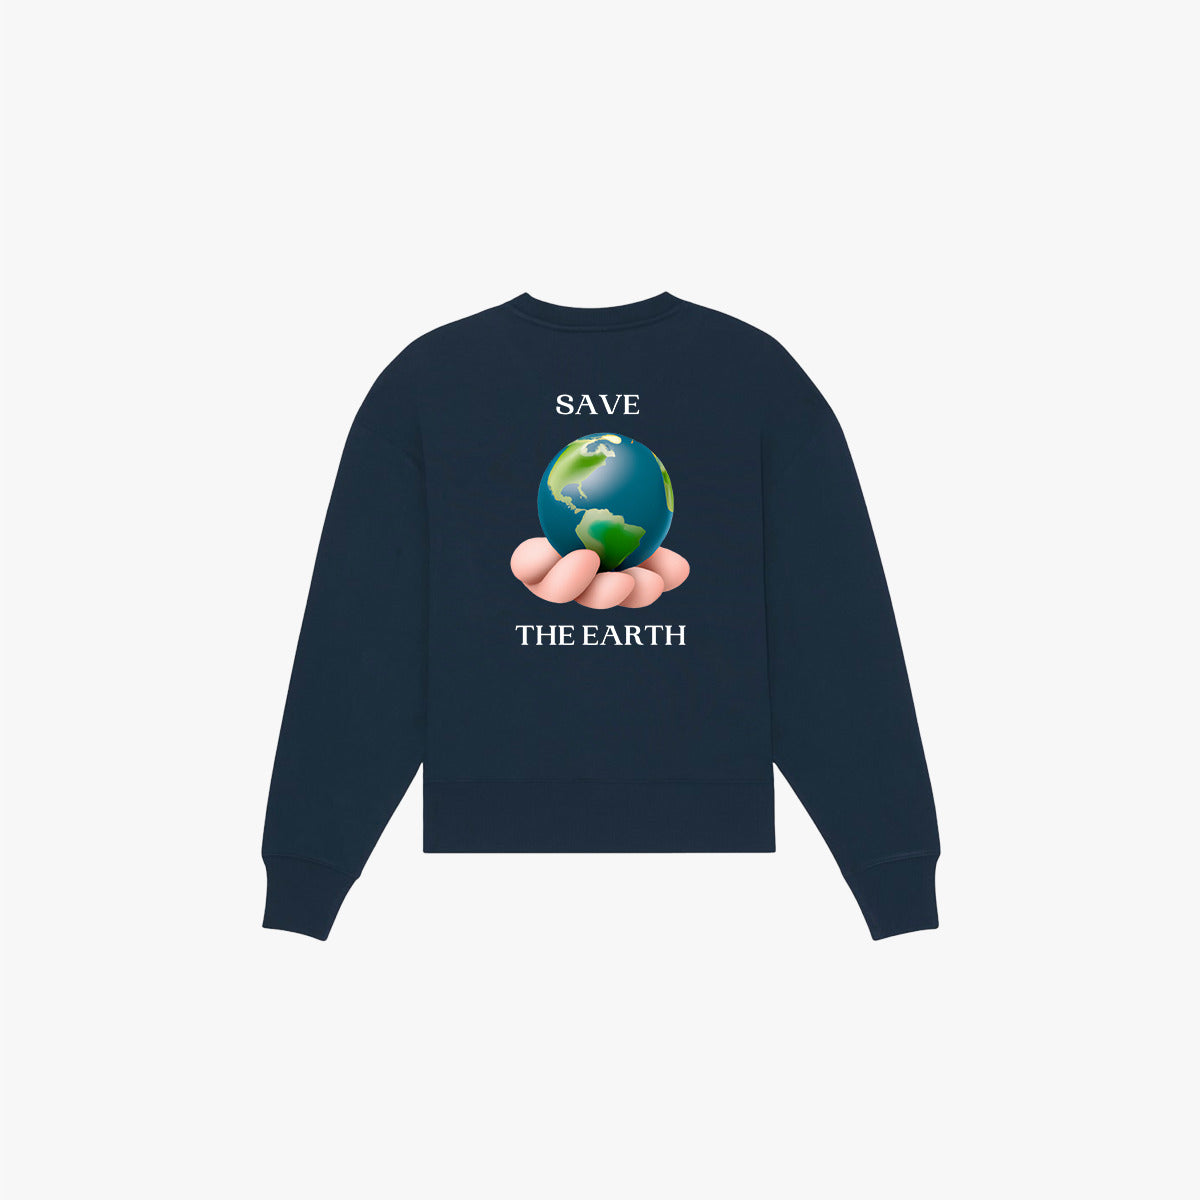 'SAVE THE EARTH' Organic Oversize Sweatshirt in der Farbe French Navy